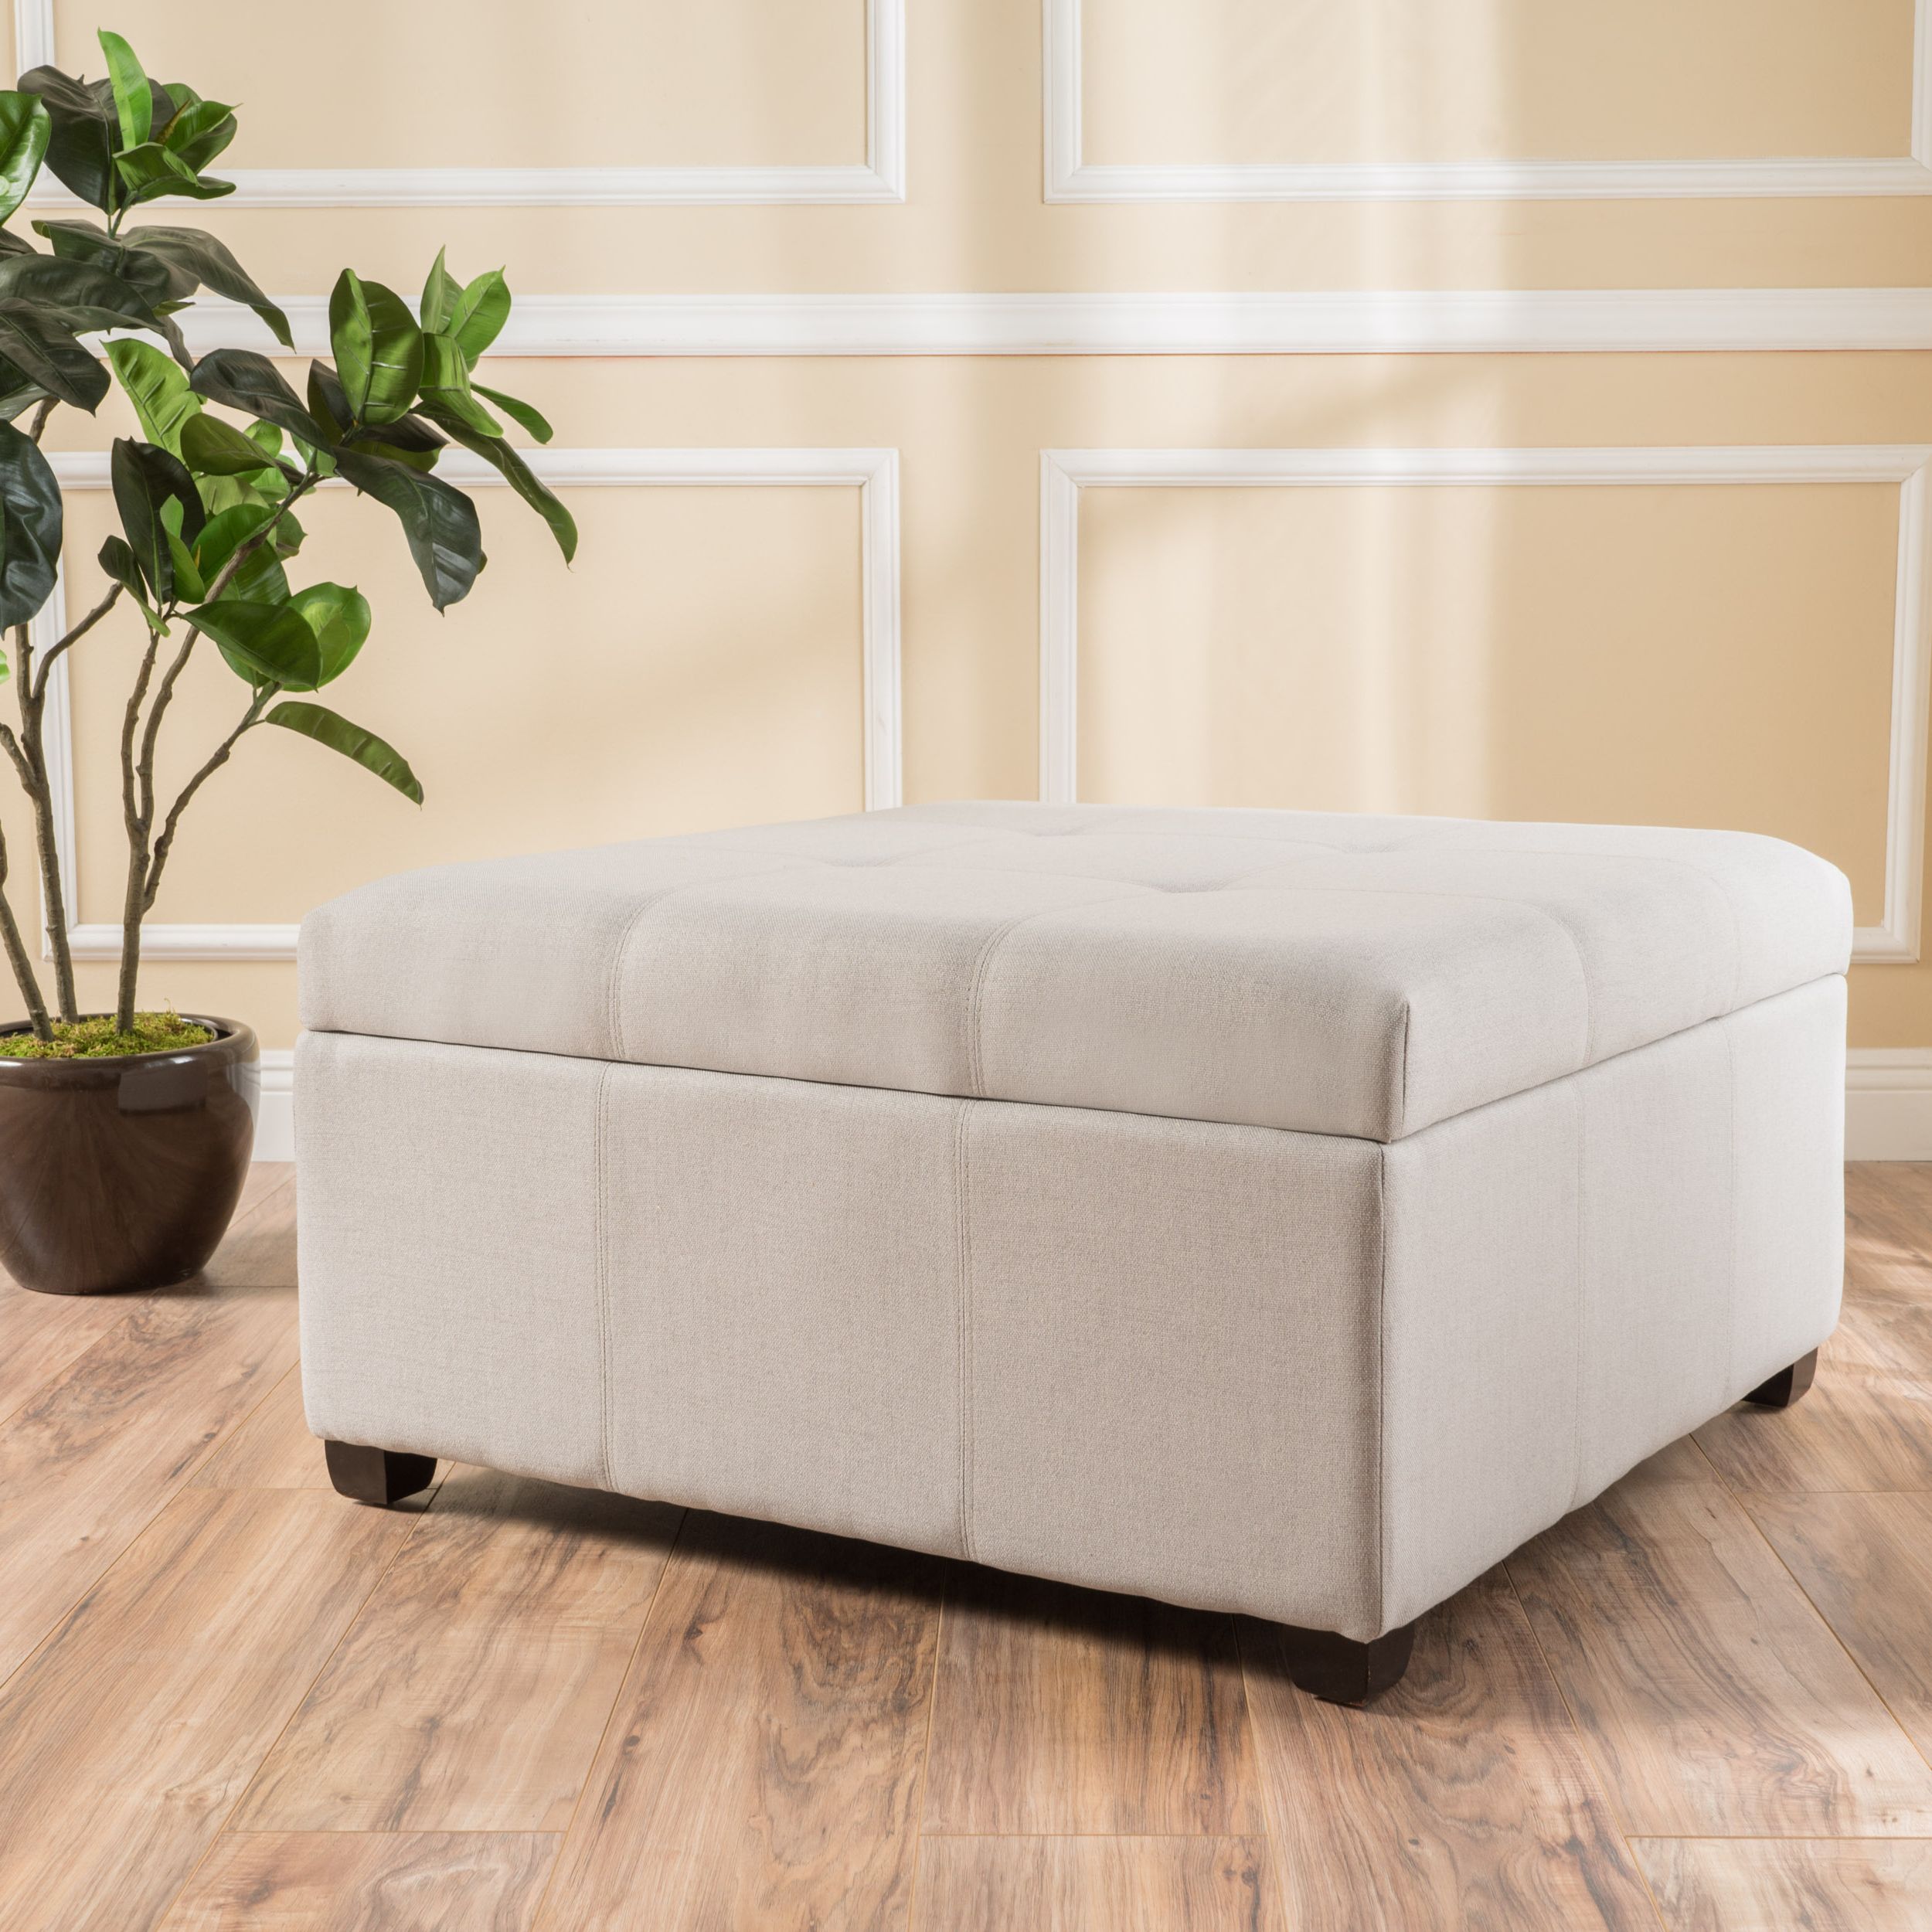 Fabric Storage Ottomans Pertaining To Recent Noble House Carlton Fabric Storage Ottoman,light Grey – Walmart (View 4 of 10)